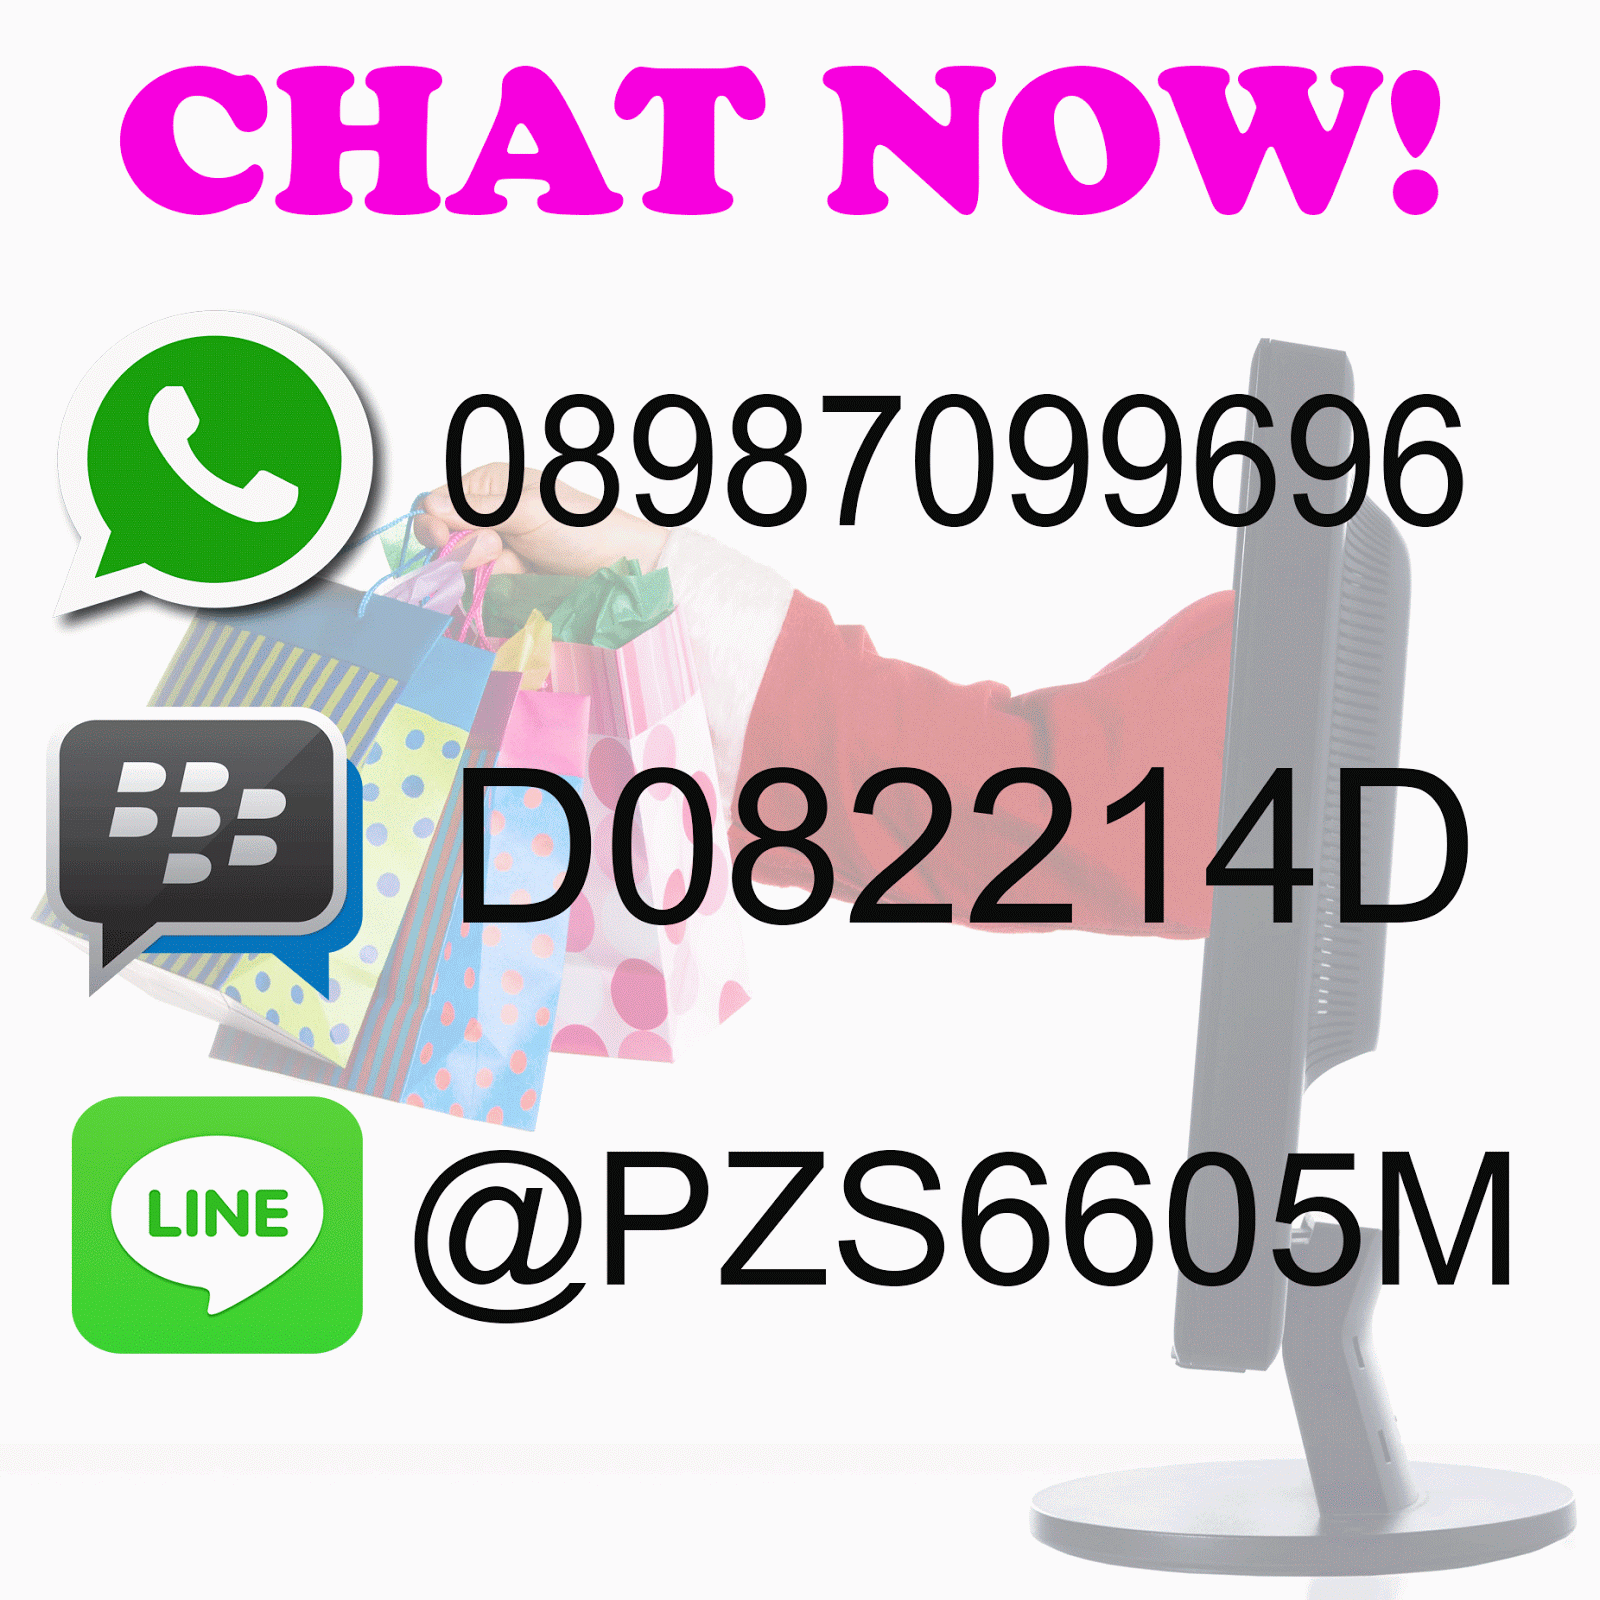 CHAT NOW!